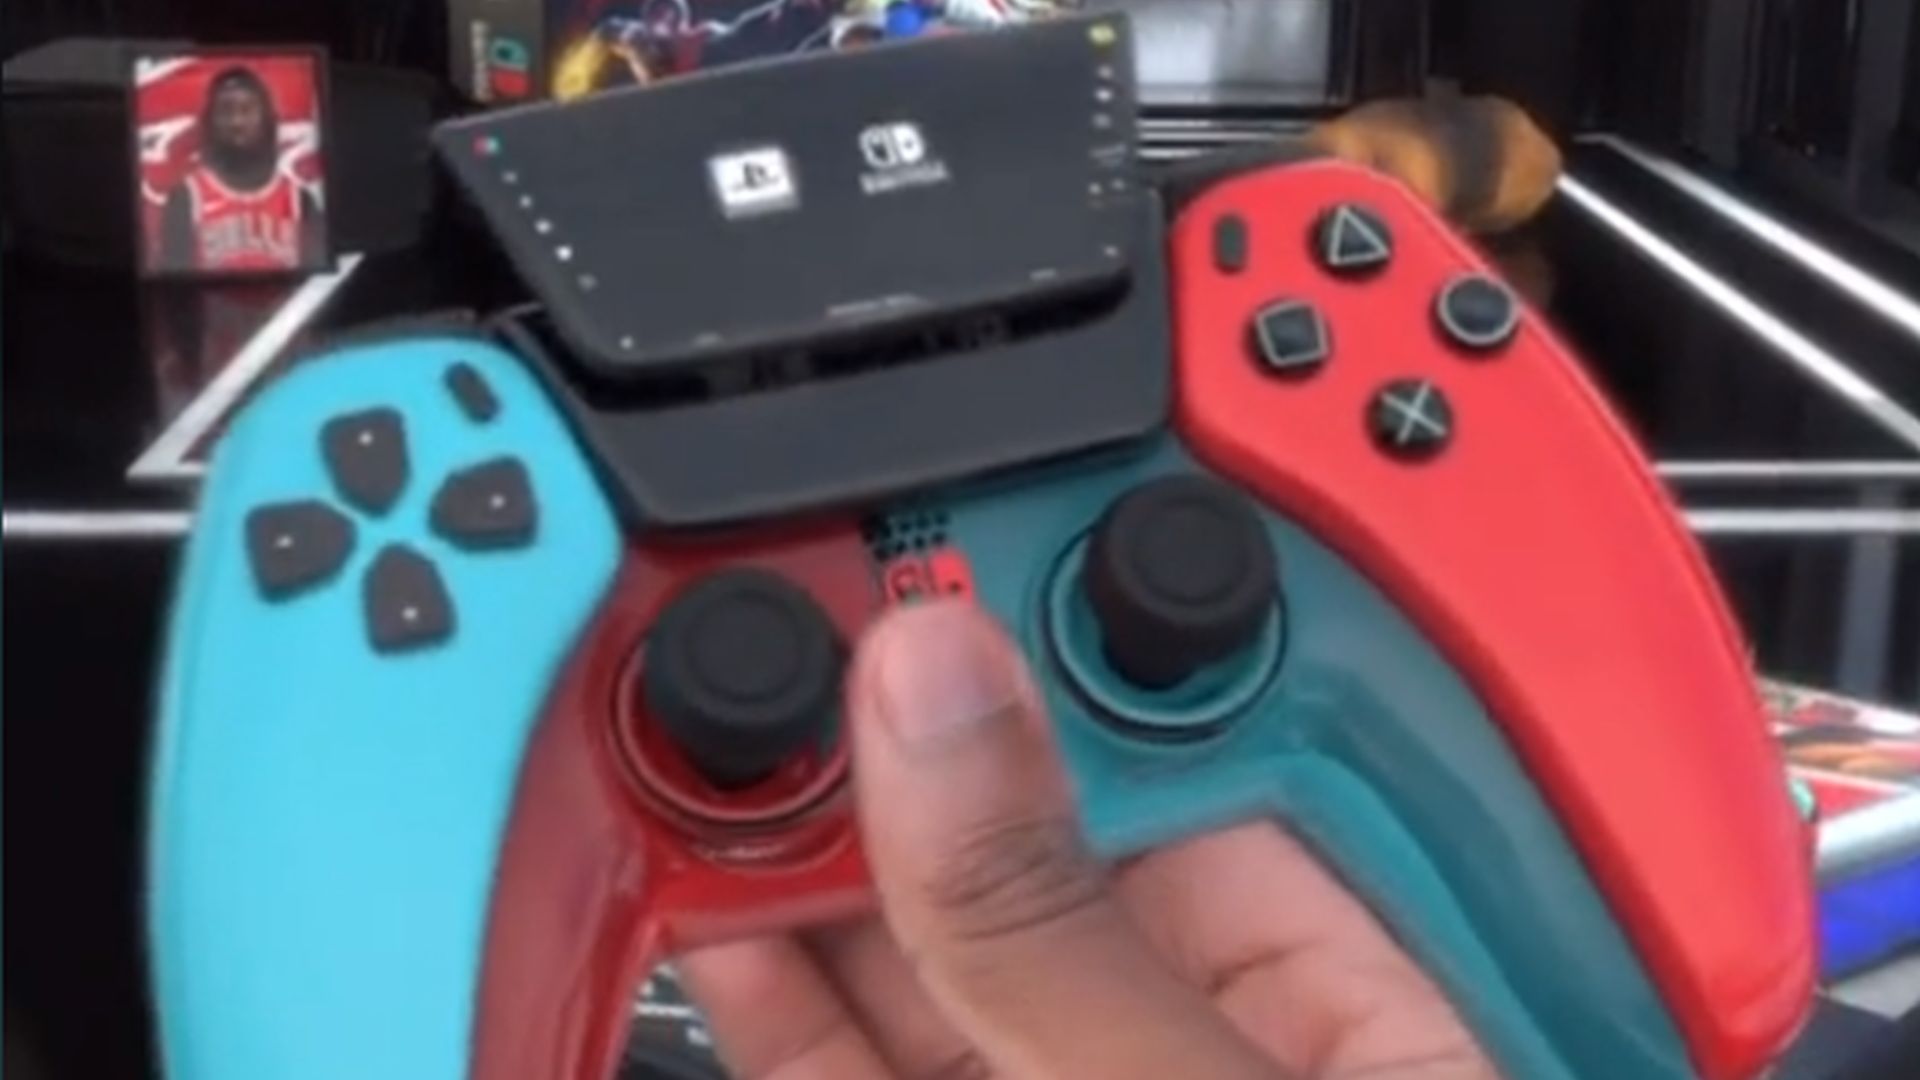 ps5 controller look like